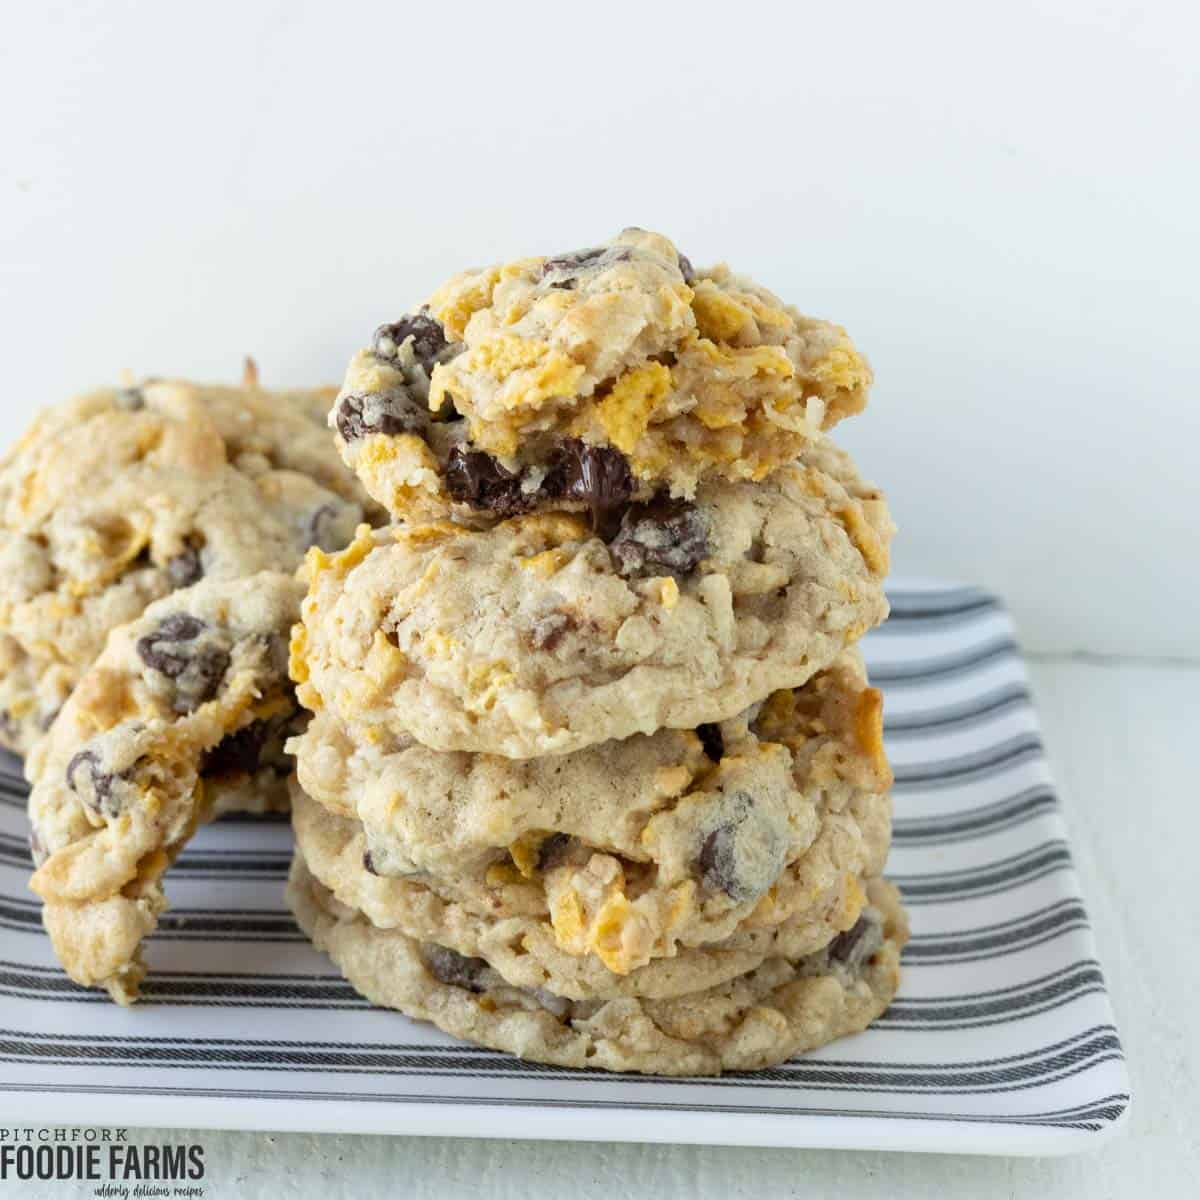 A stack of cookies with coconut, chocolate chips, oats, and cornflakes.